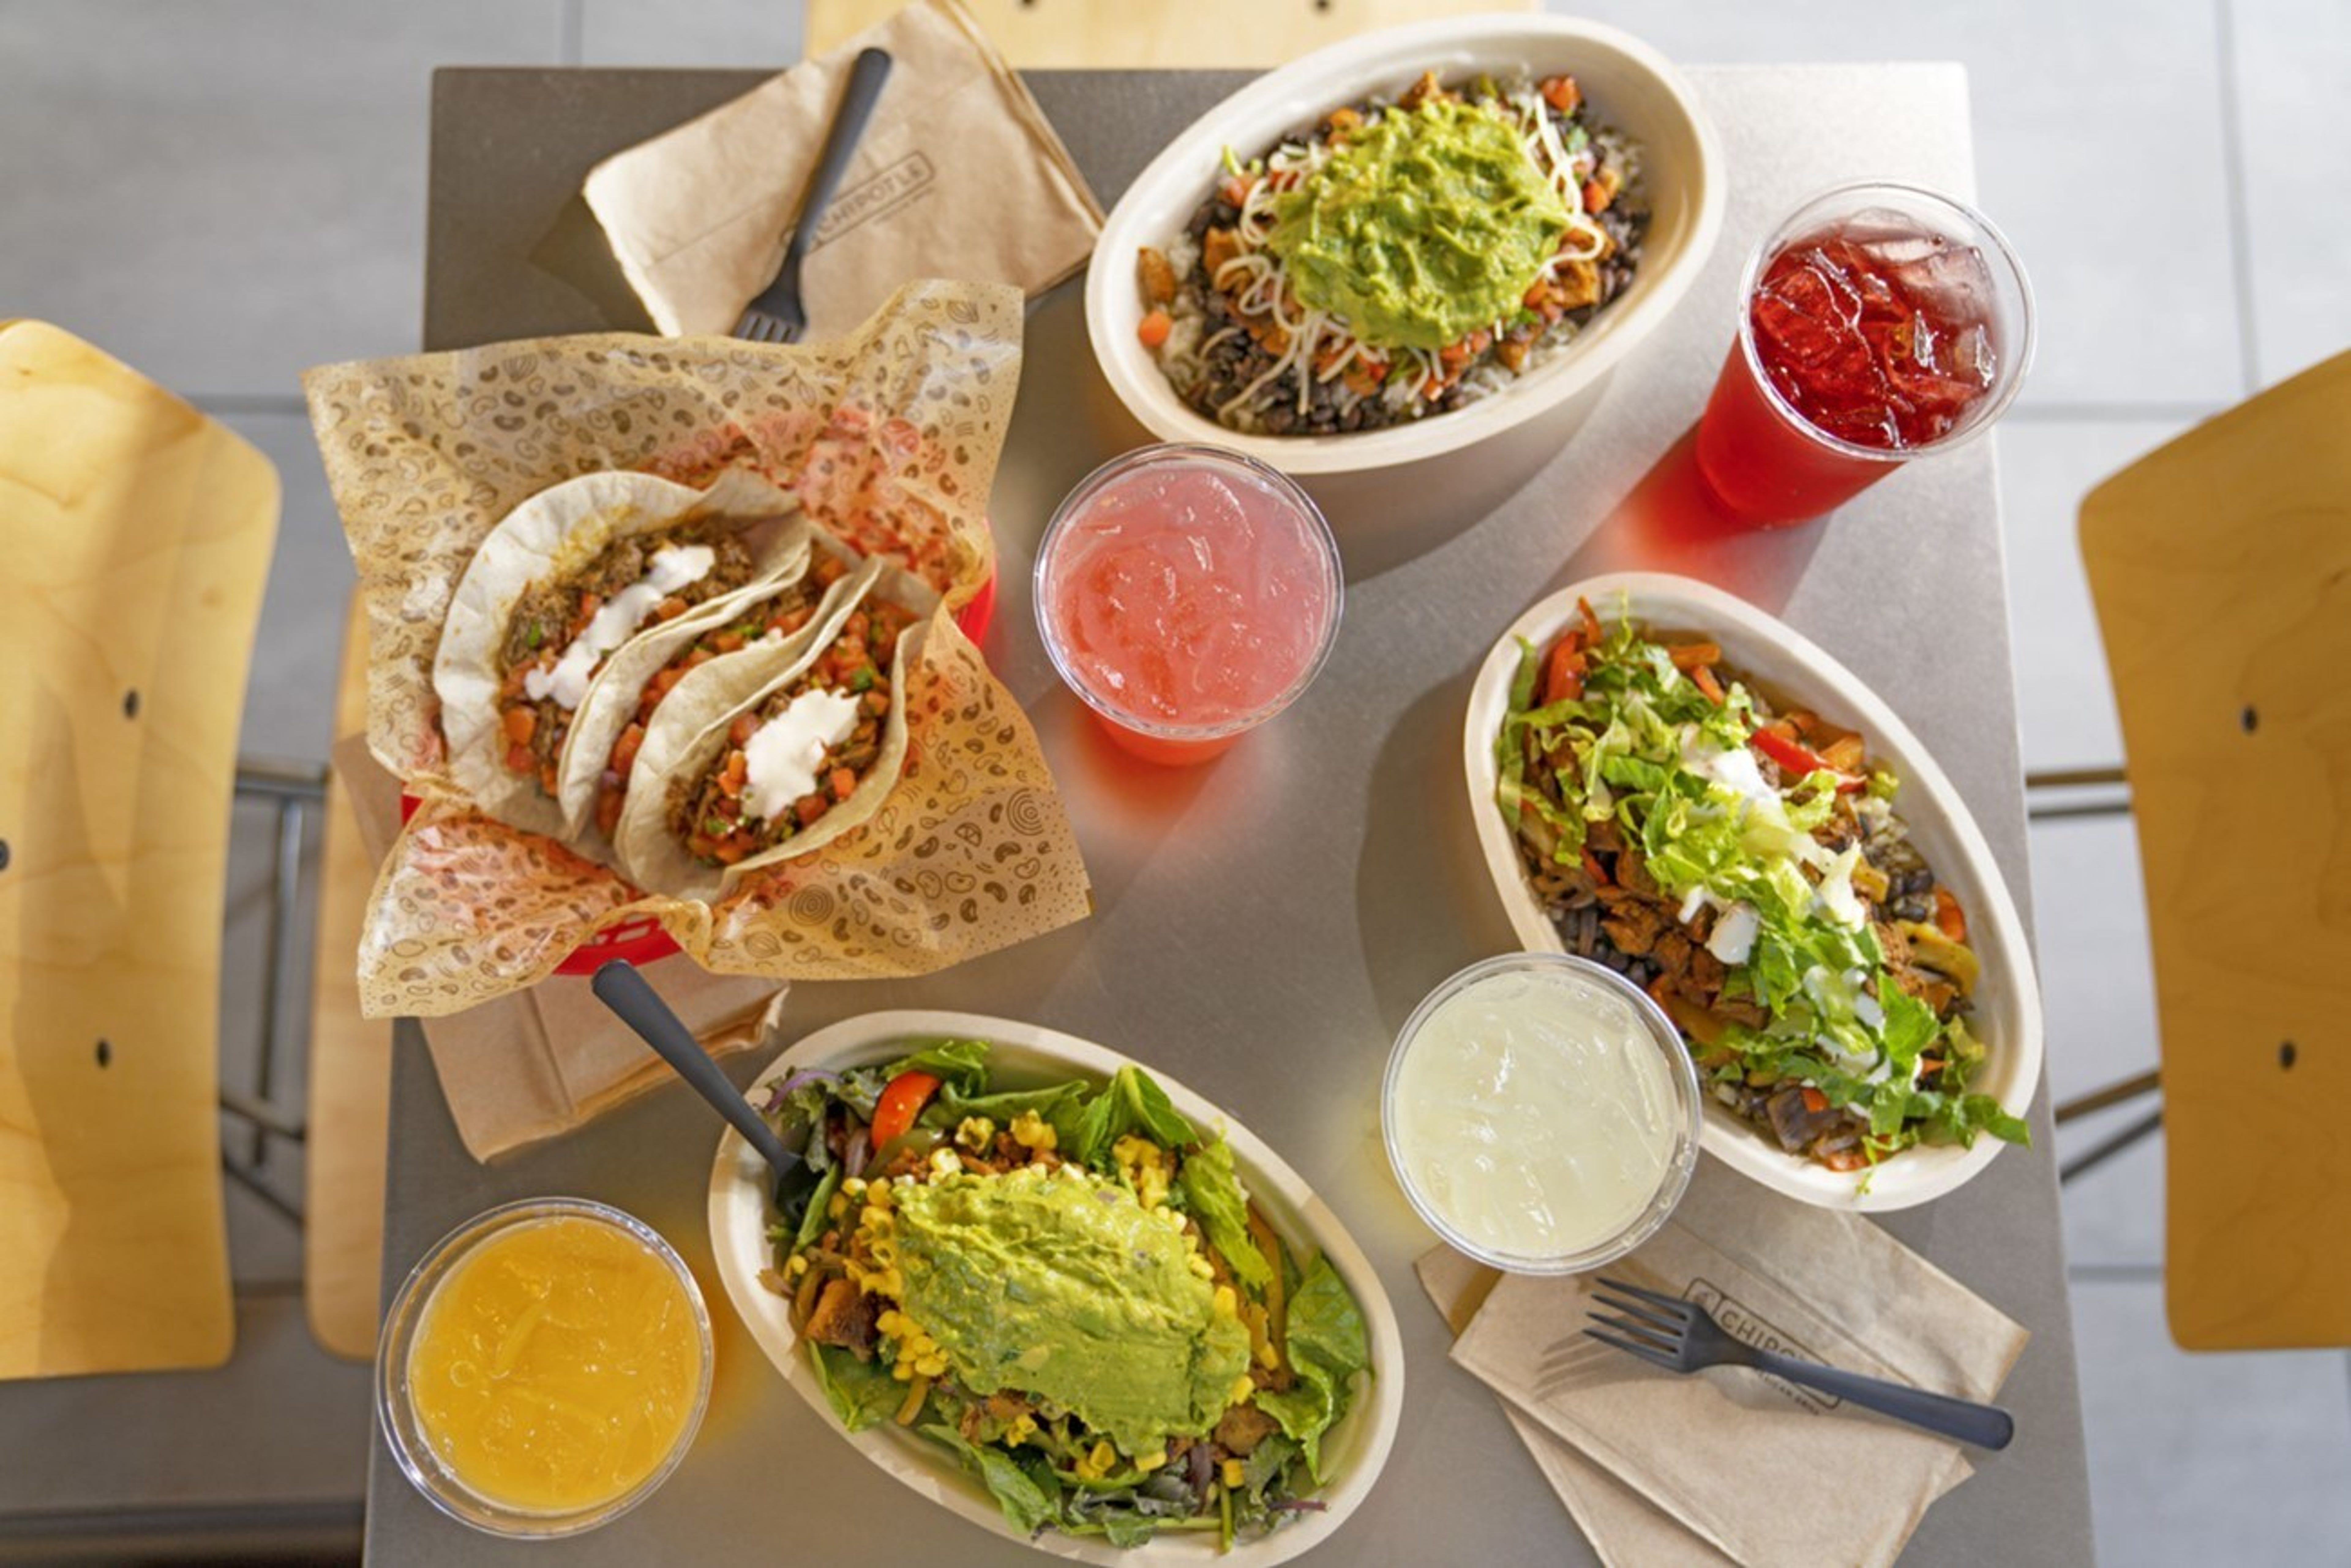 Chipotle Mexican Grill Has A Following Wind Into 2021, Stifel Says In Upgrade